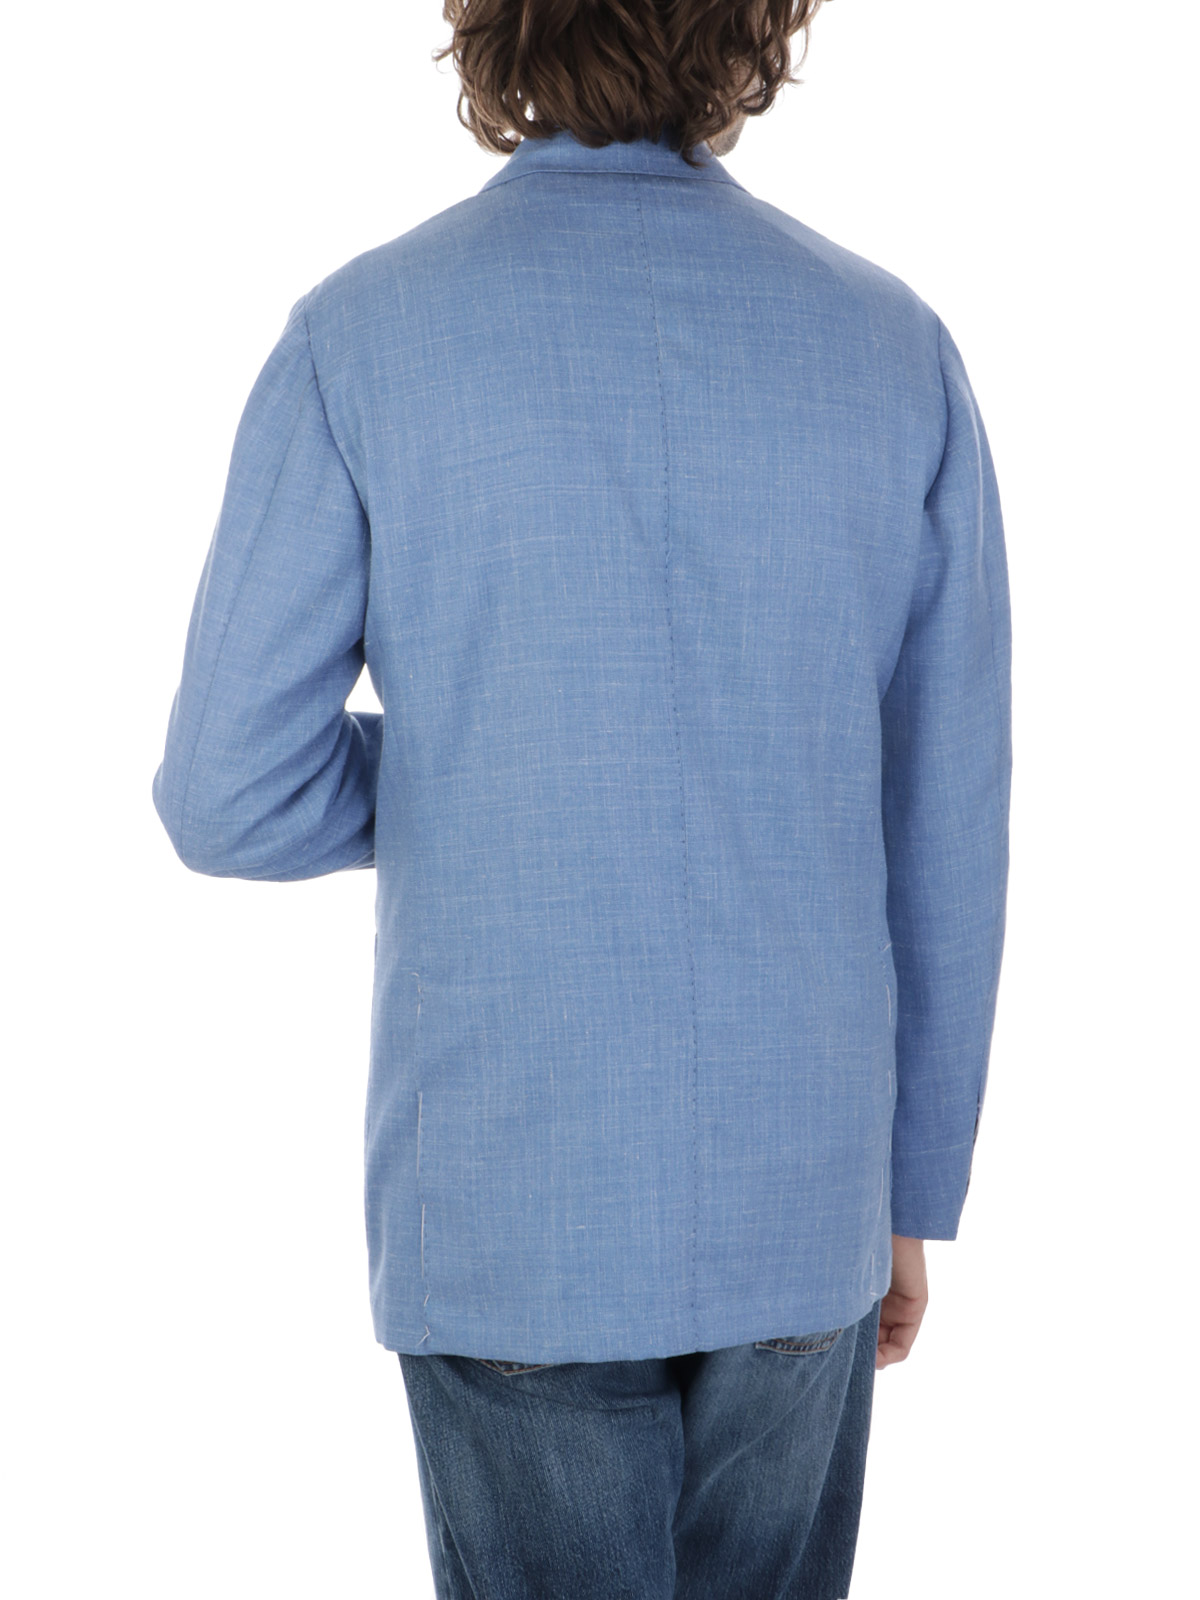 Picture of SARTORIO | Men's Wool And Silk Jacket